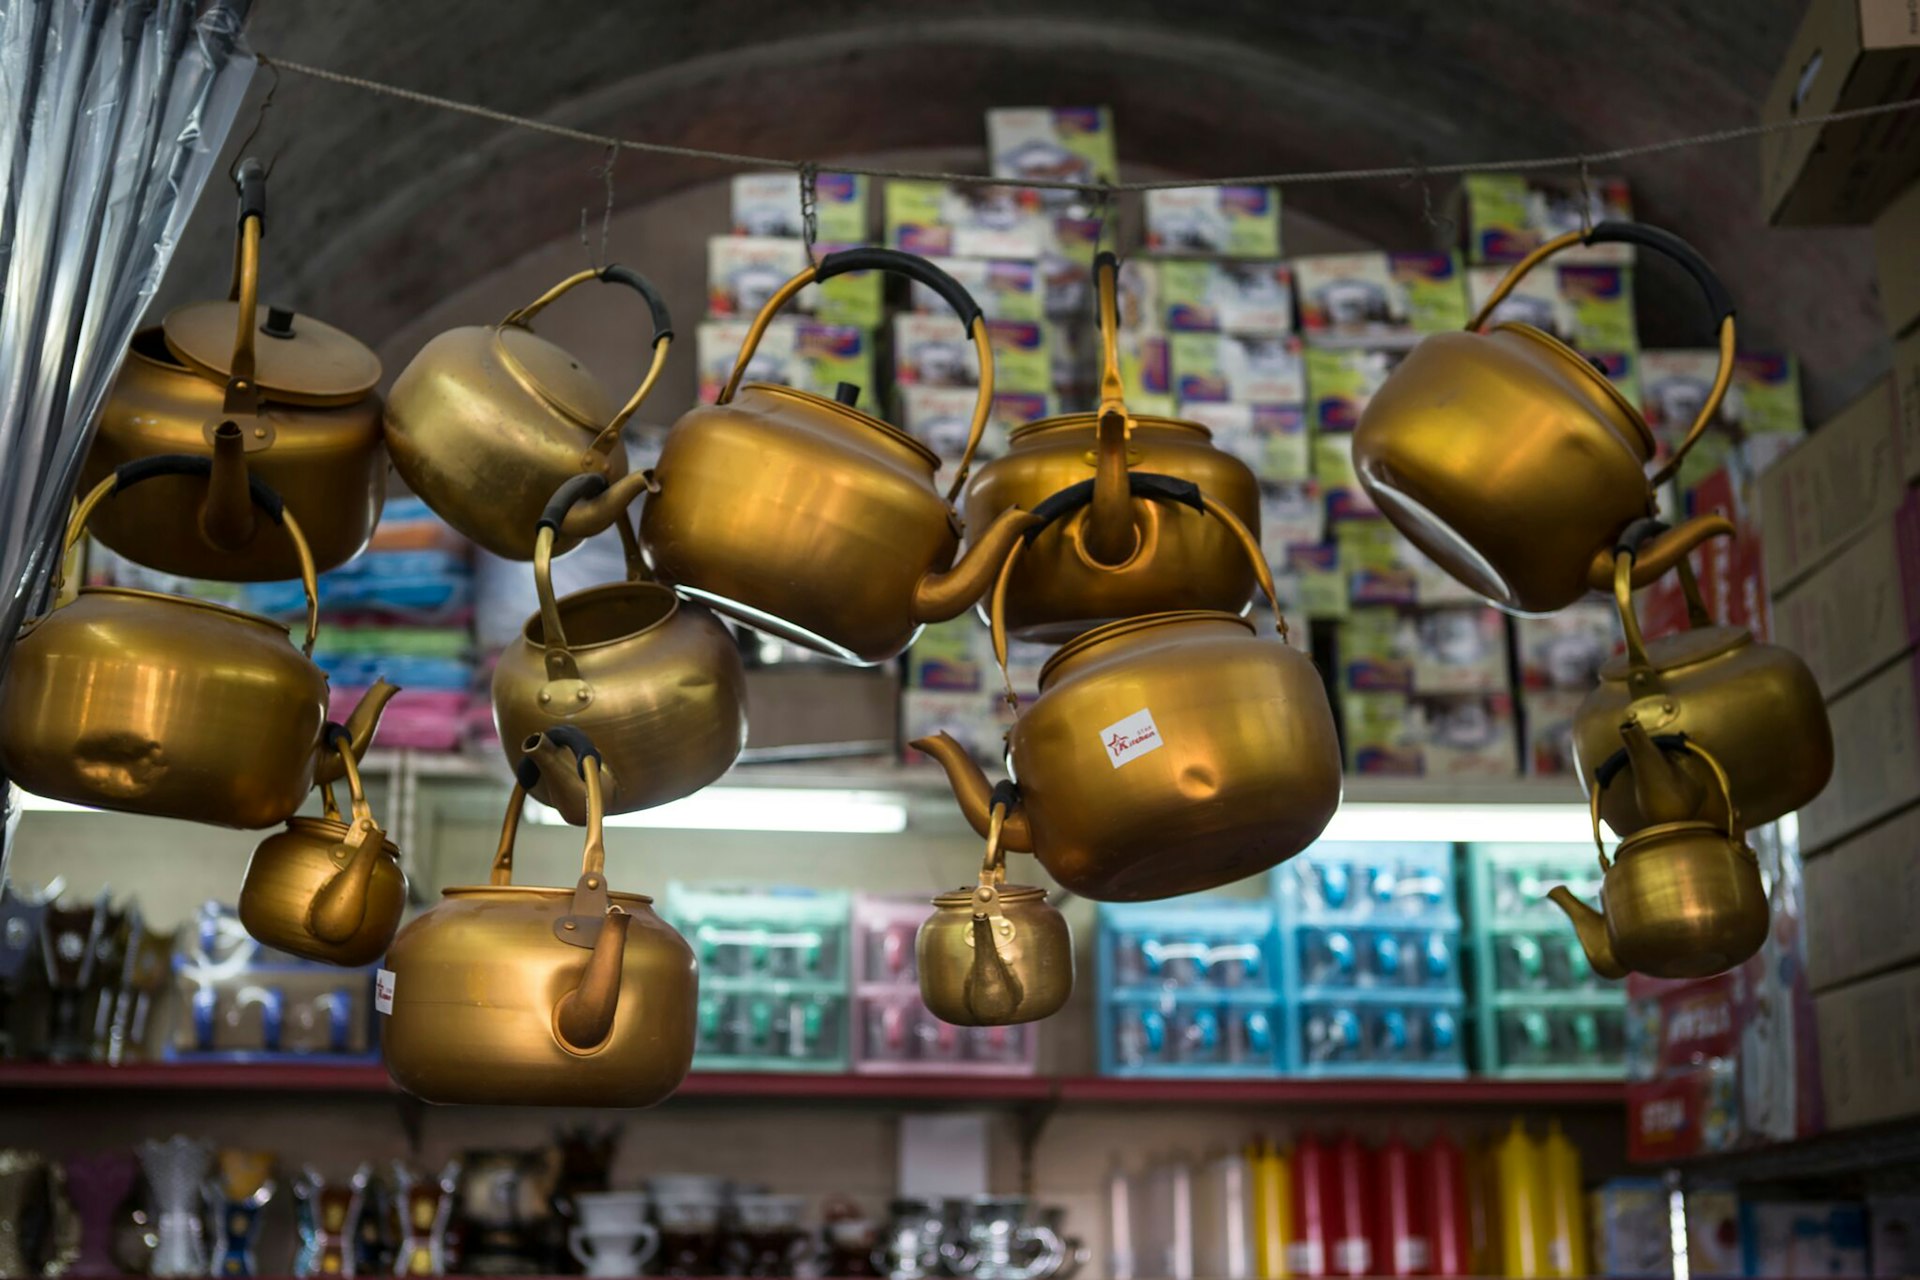 Teapots at the market © Matilde Gattoni / Getty Images